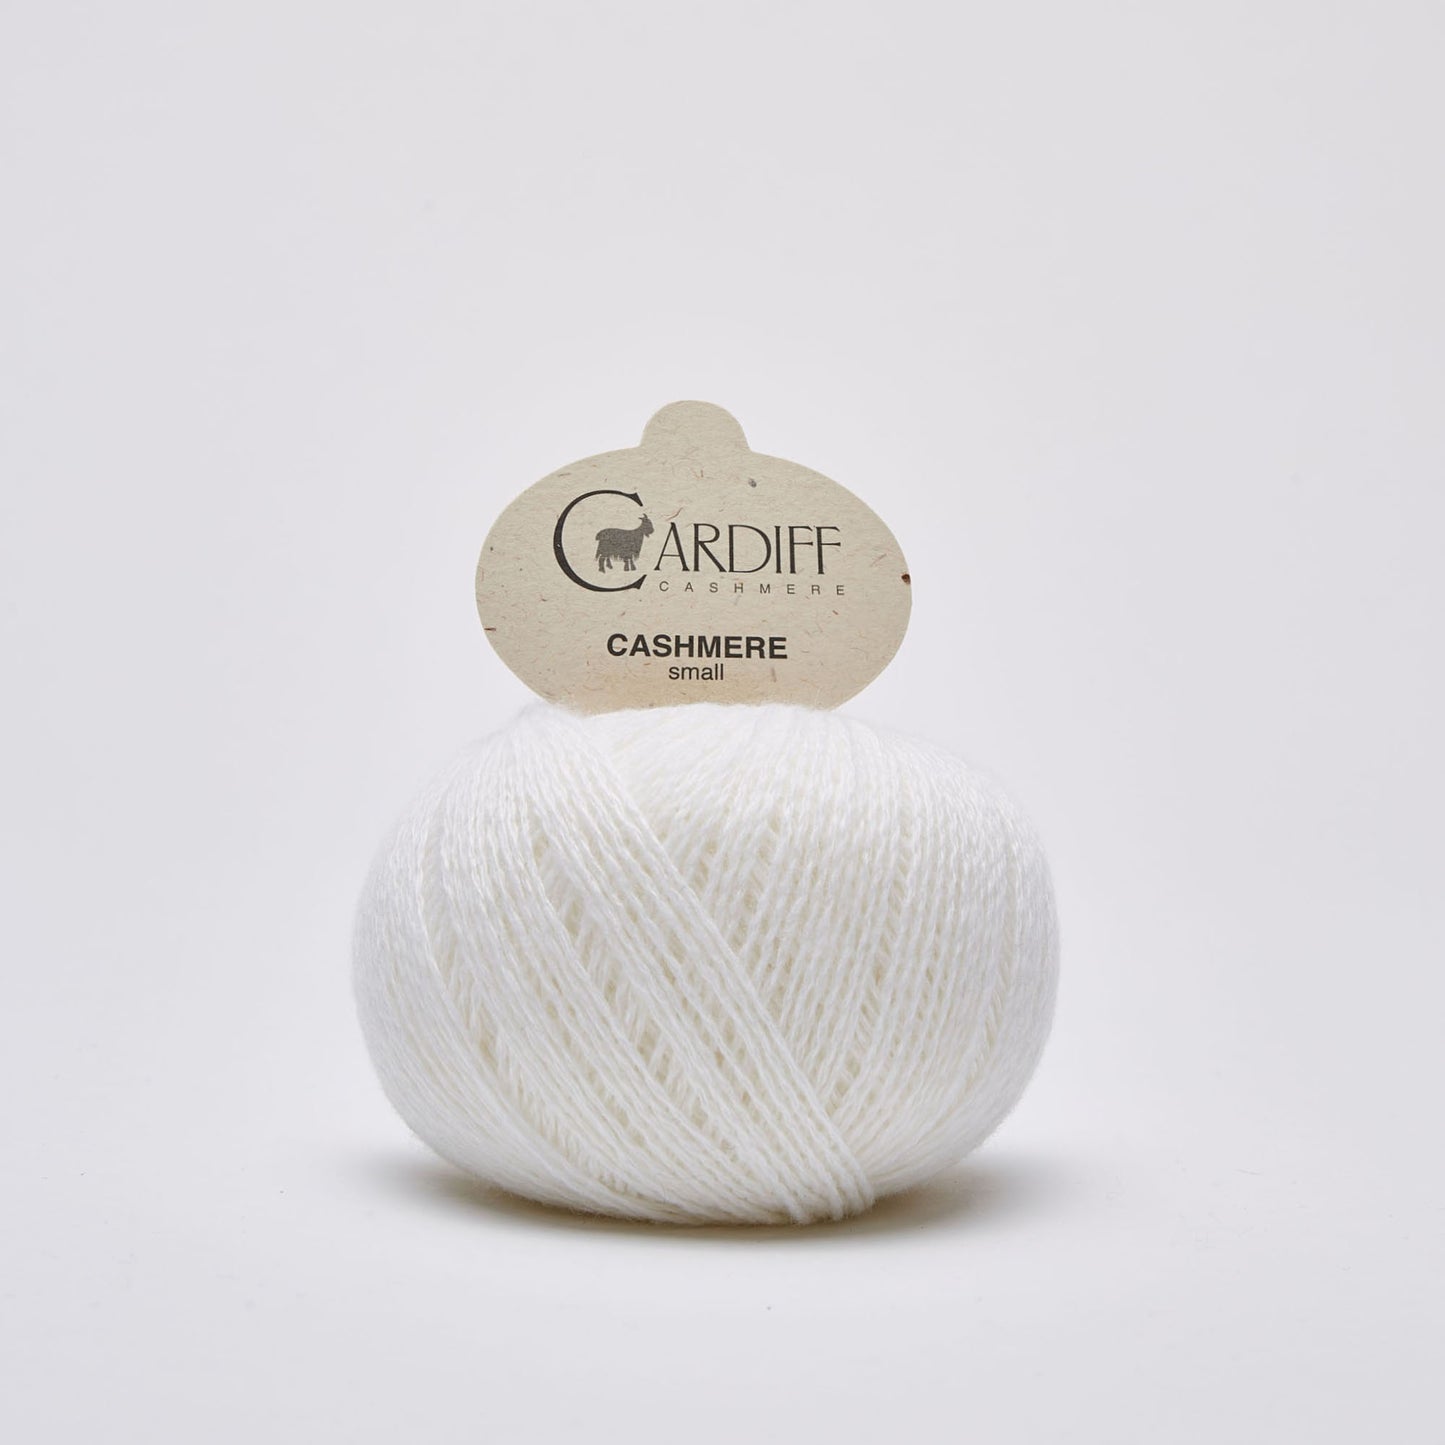 Cardiff SMALL gentle yarn, 623, CANDIDO, comp: 100% Cashmere